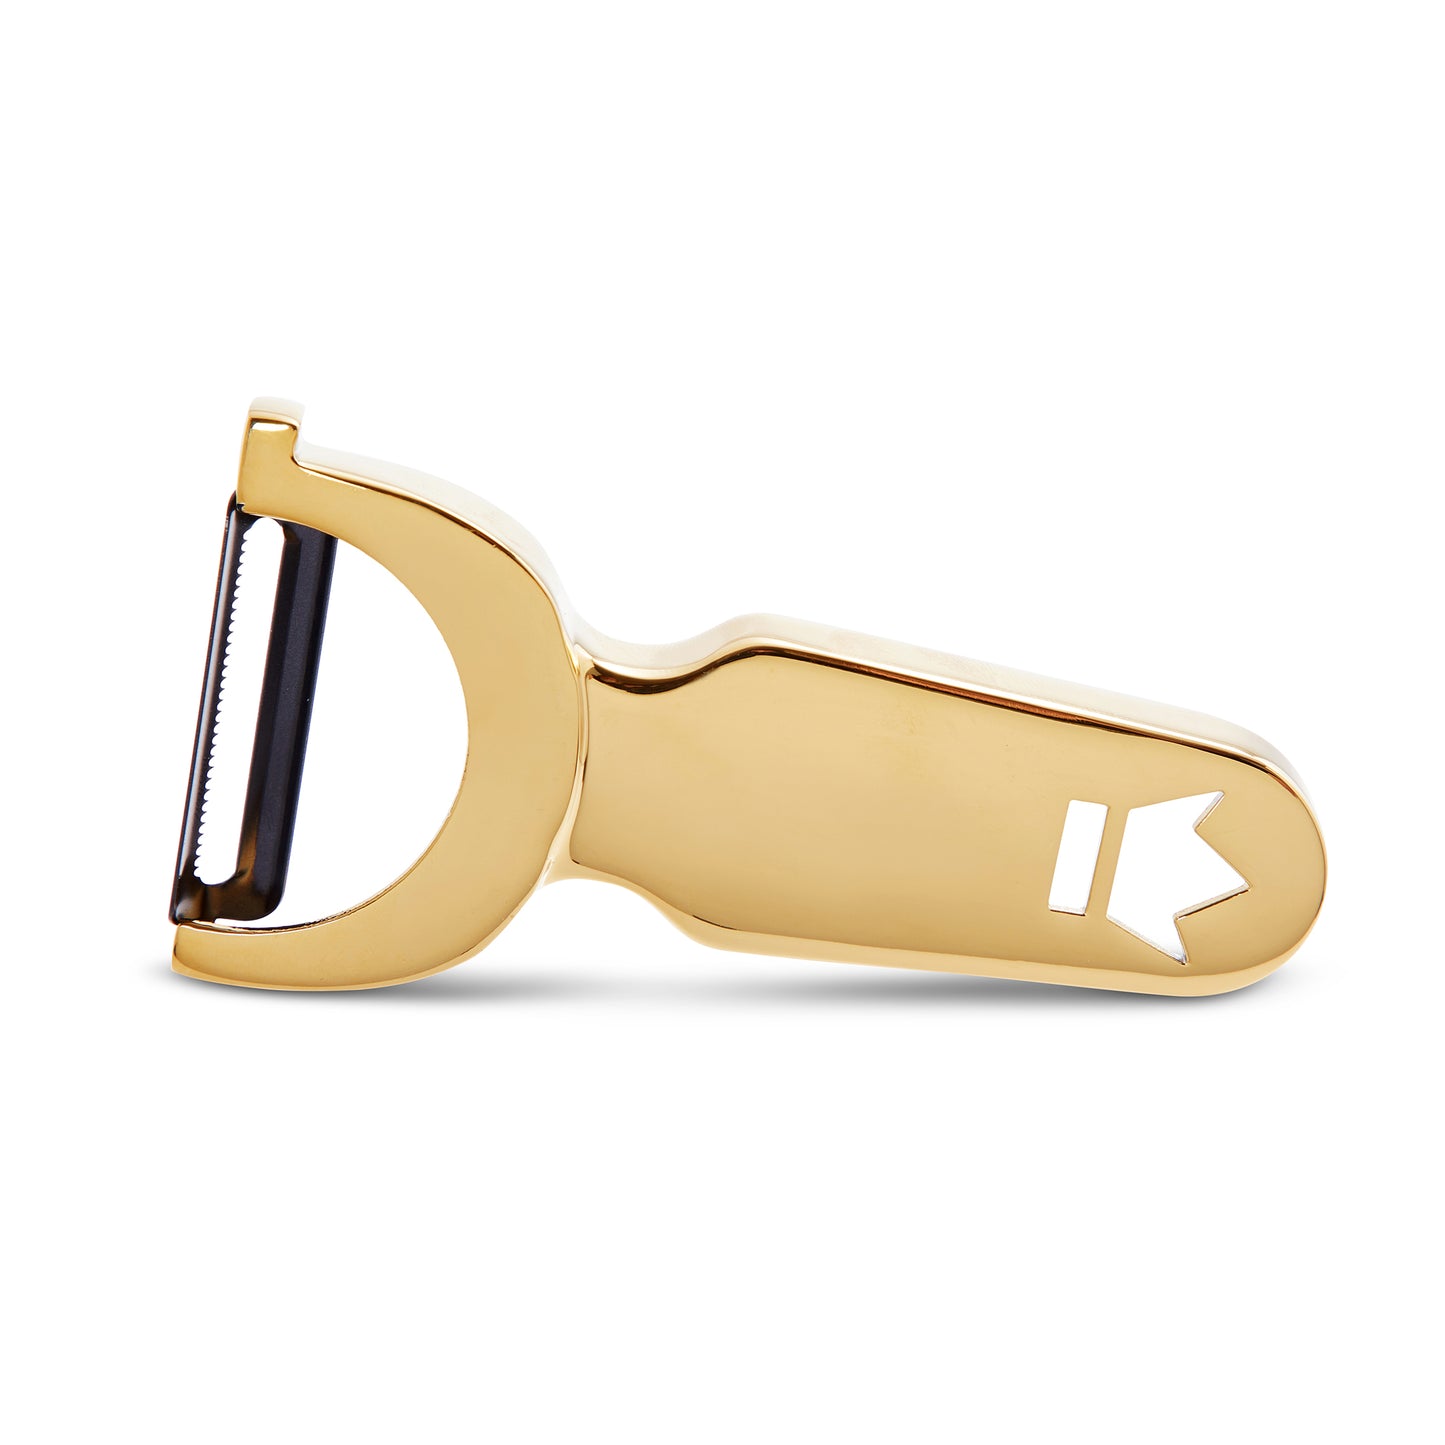 BUSWELL® CAST METAL PEELER - SERRATED / GOLD-PLATED